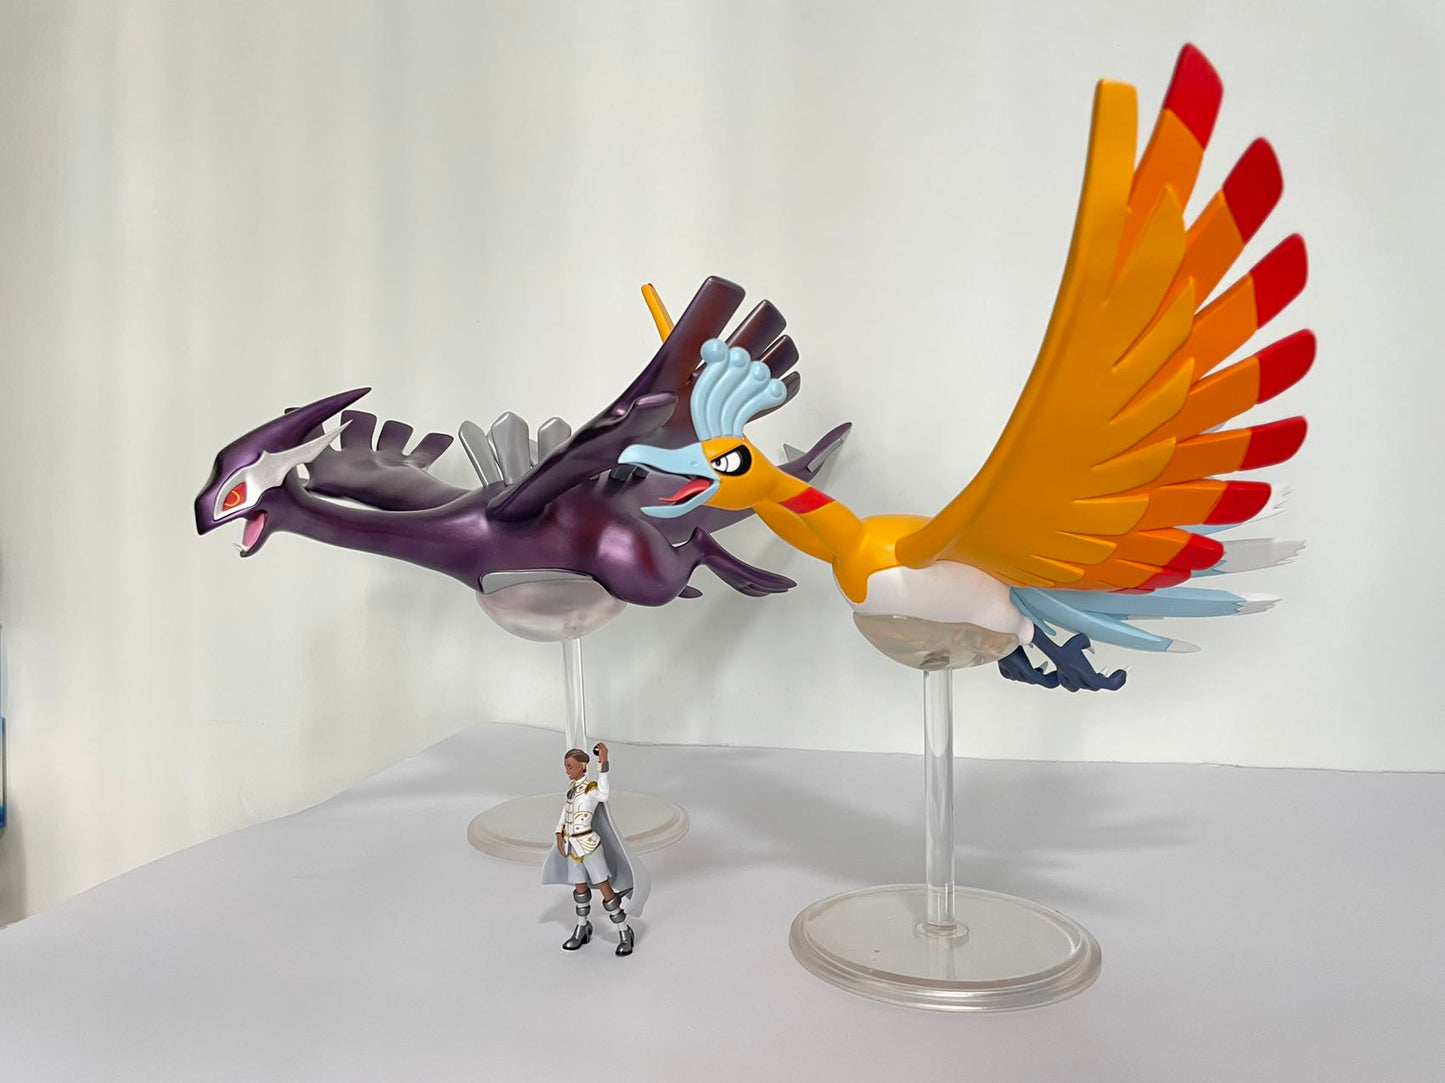 〖Sold Out〗Pokemon Scale World Lugia Ho-Oh #249 #250 1:20 - King Studio